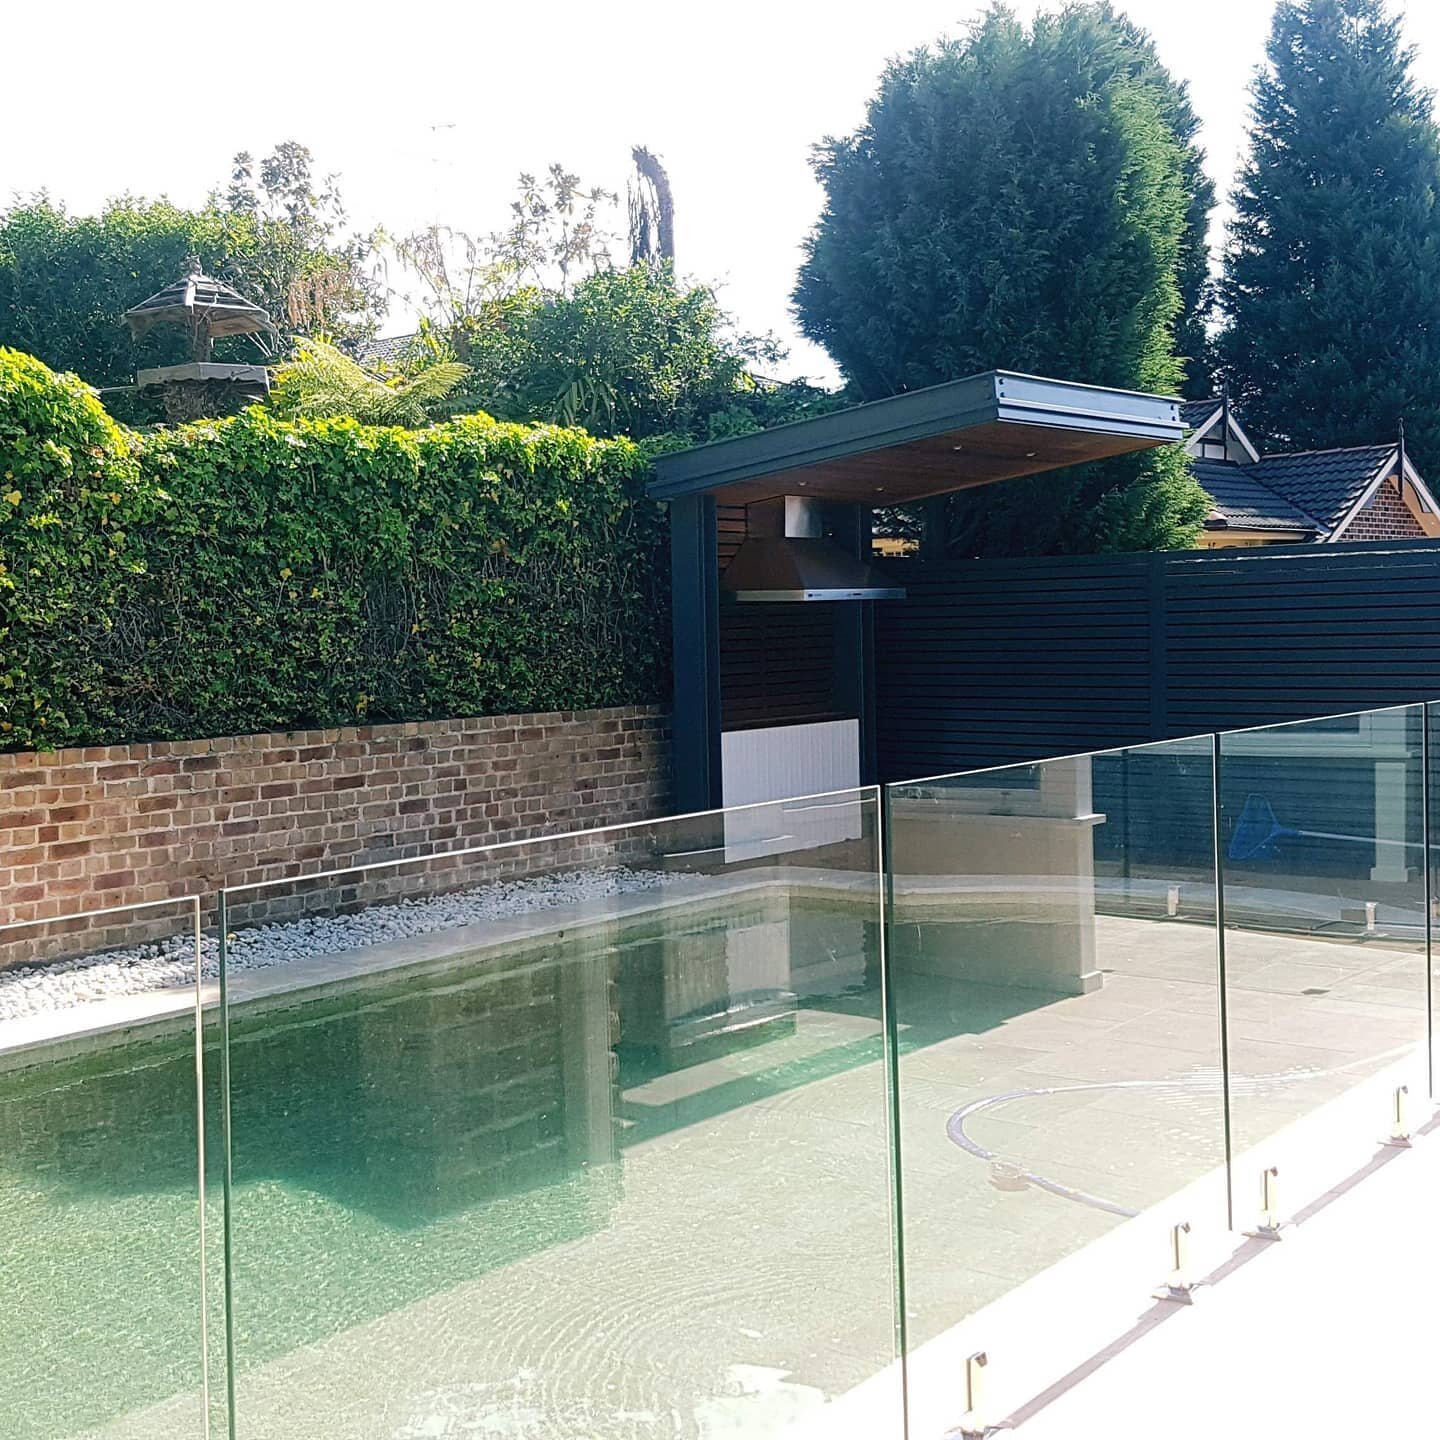 Frameless glass pool fencing is a great way to ensure your families safety while not compromising on the looks 💦💦